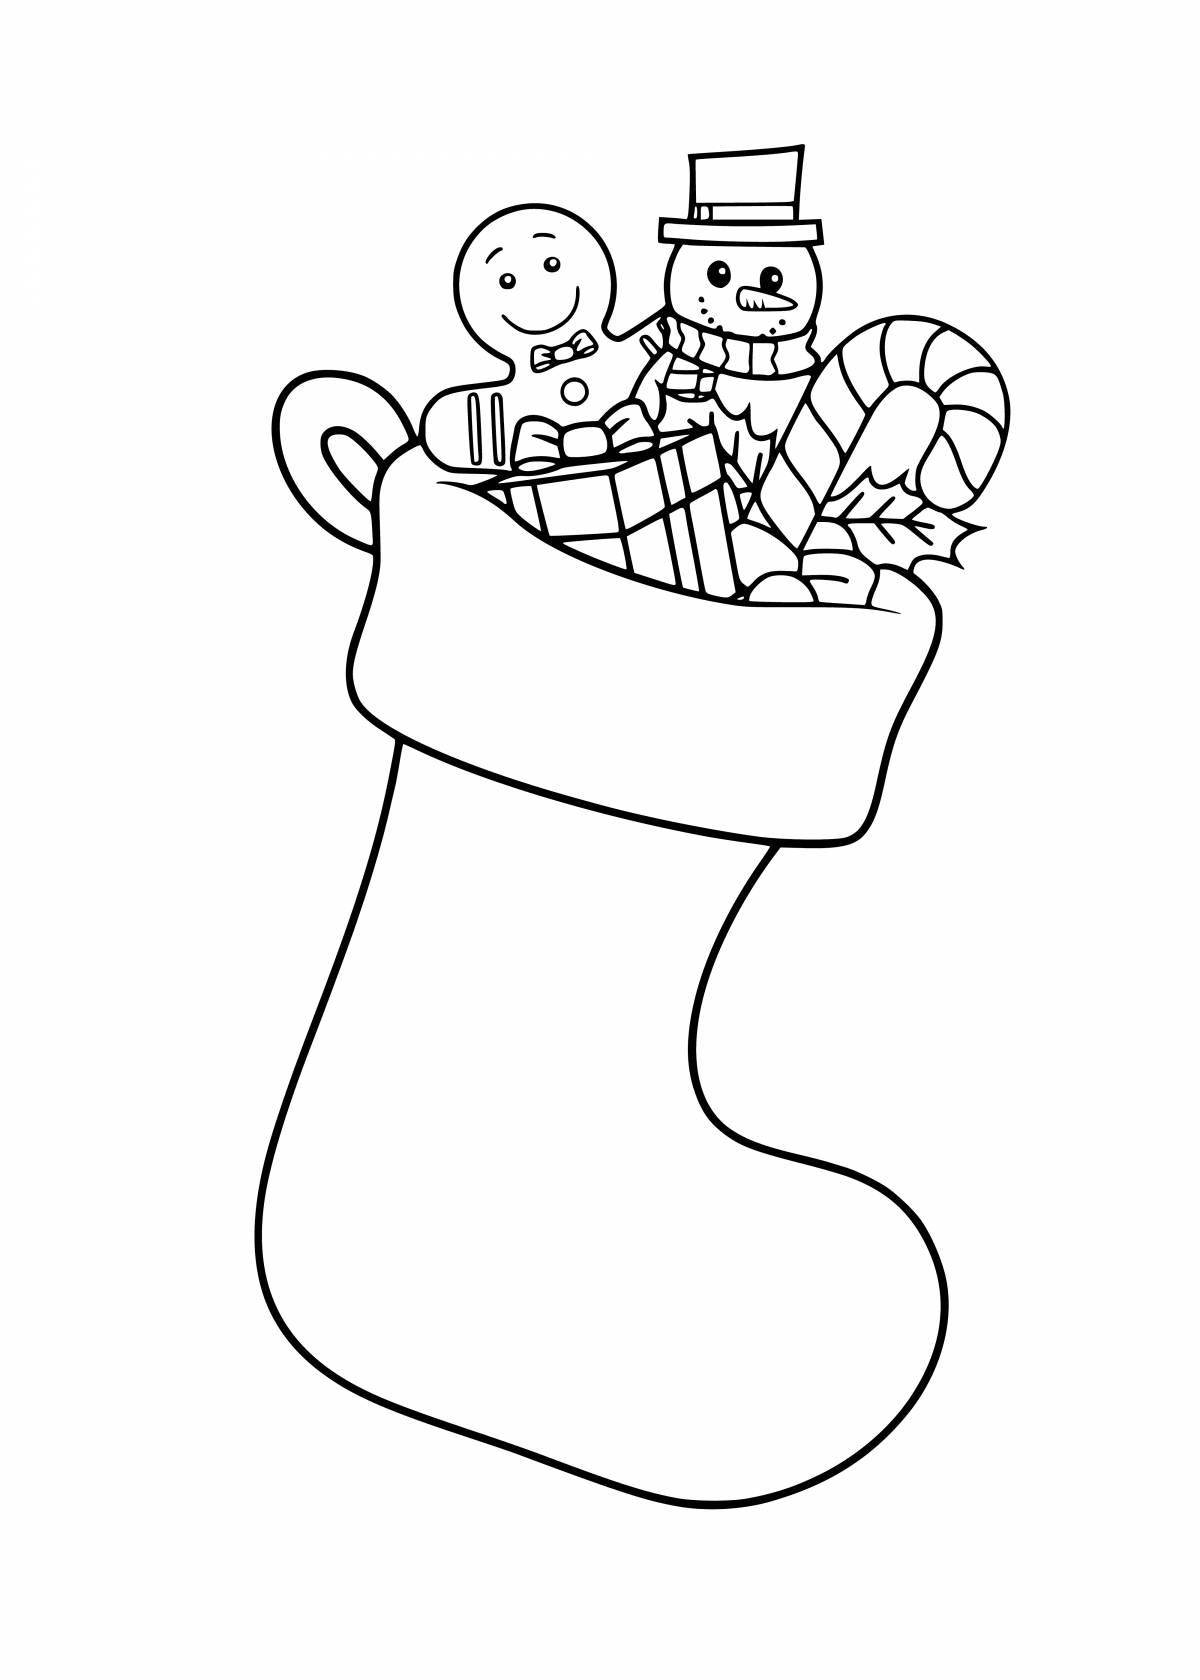 Coloring page dazzling christmas sock